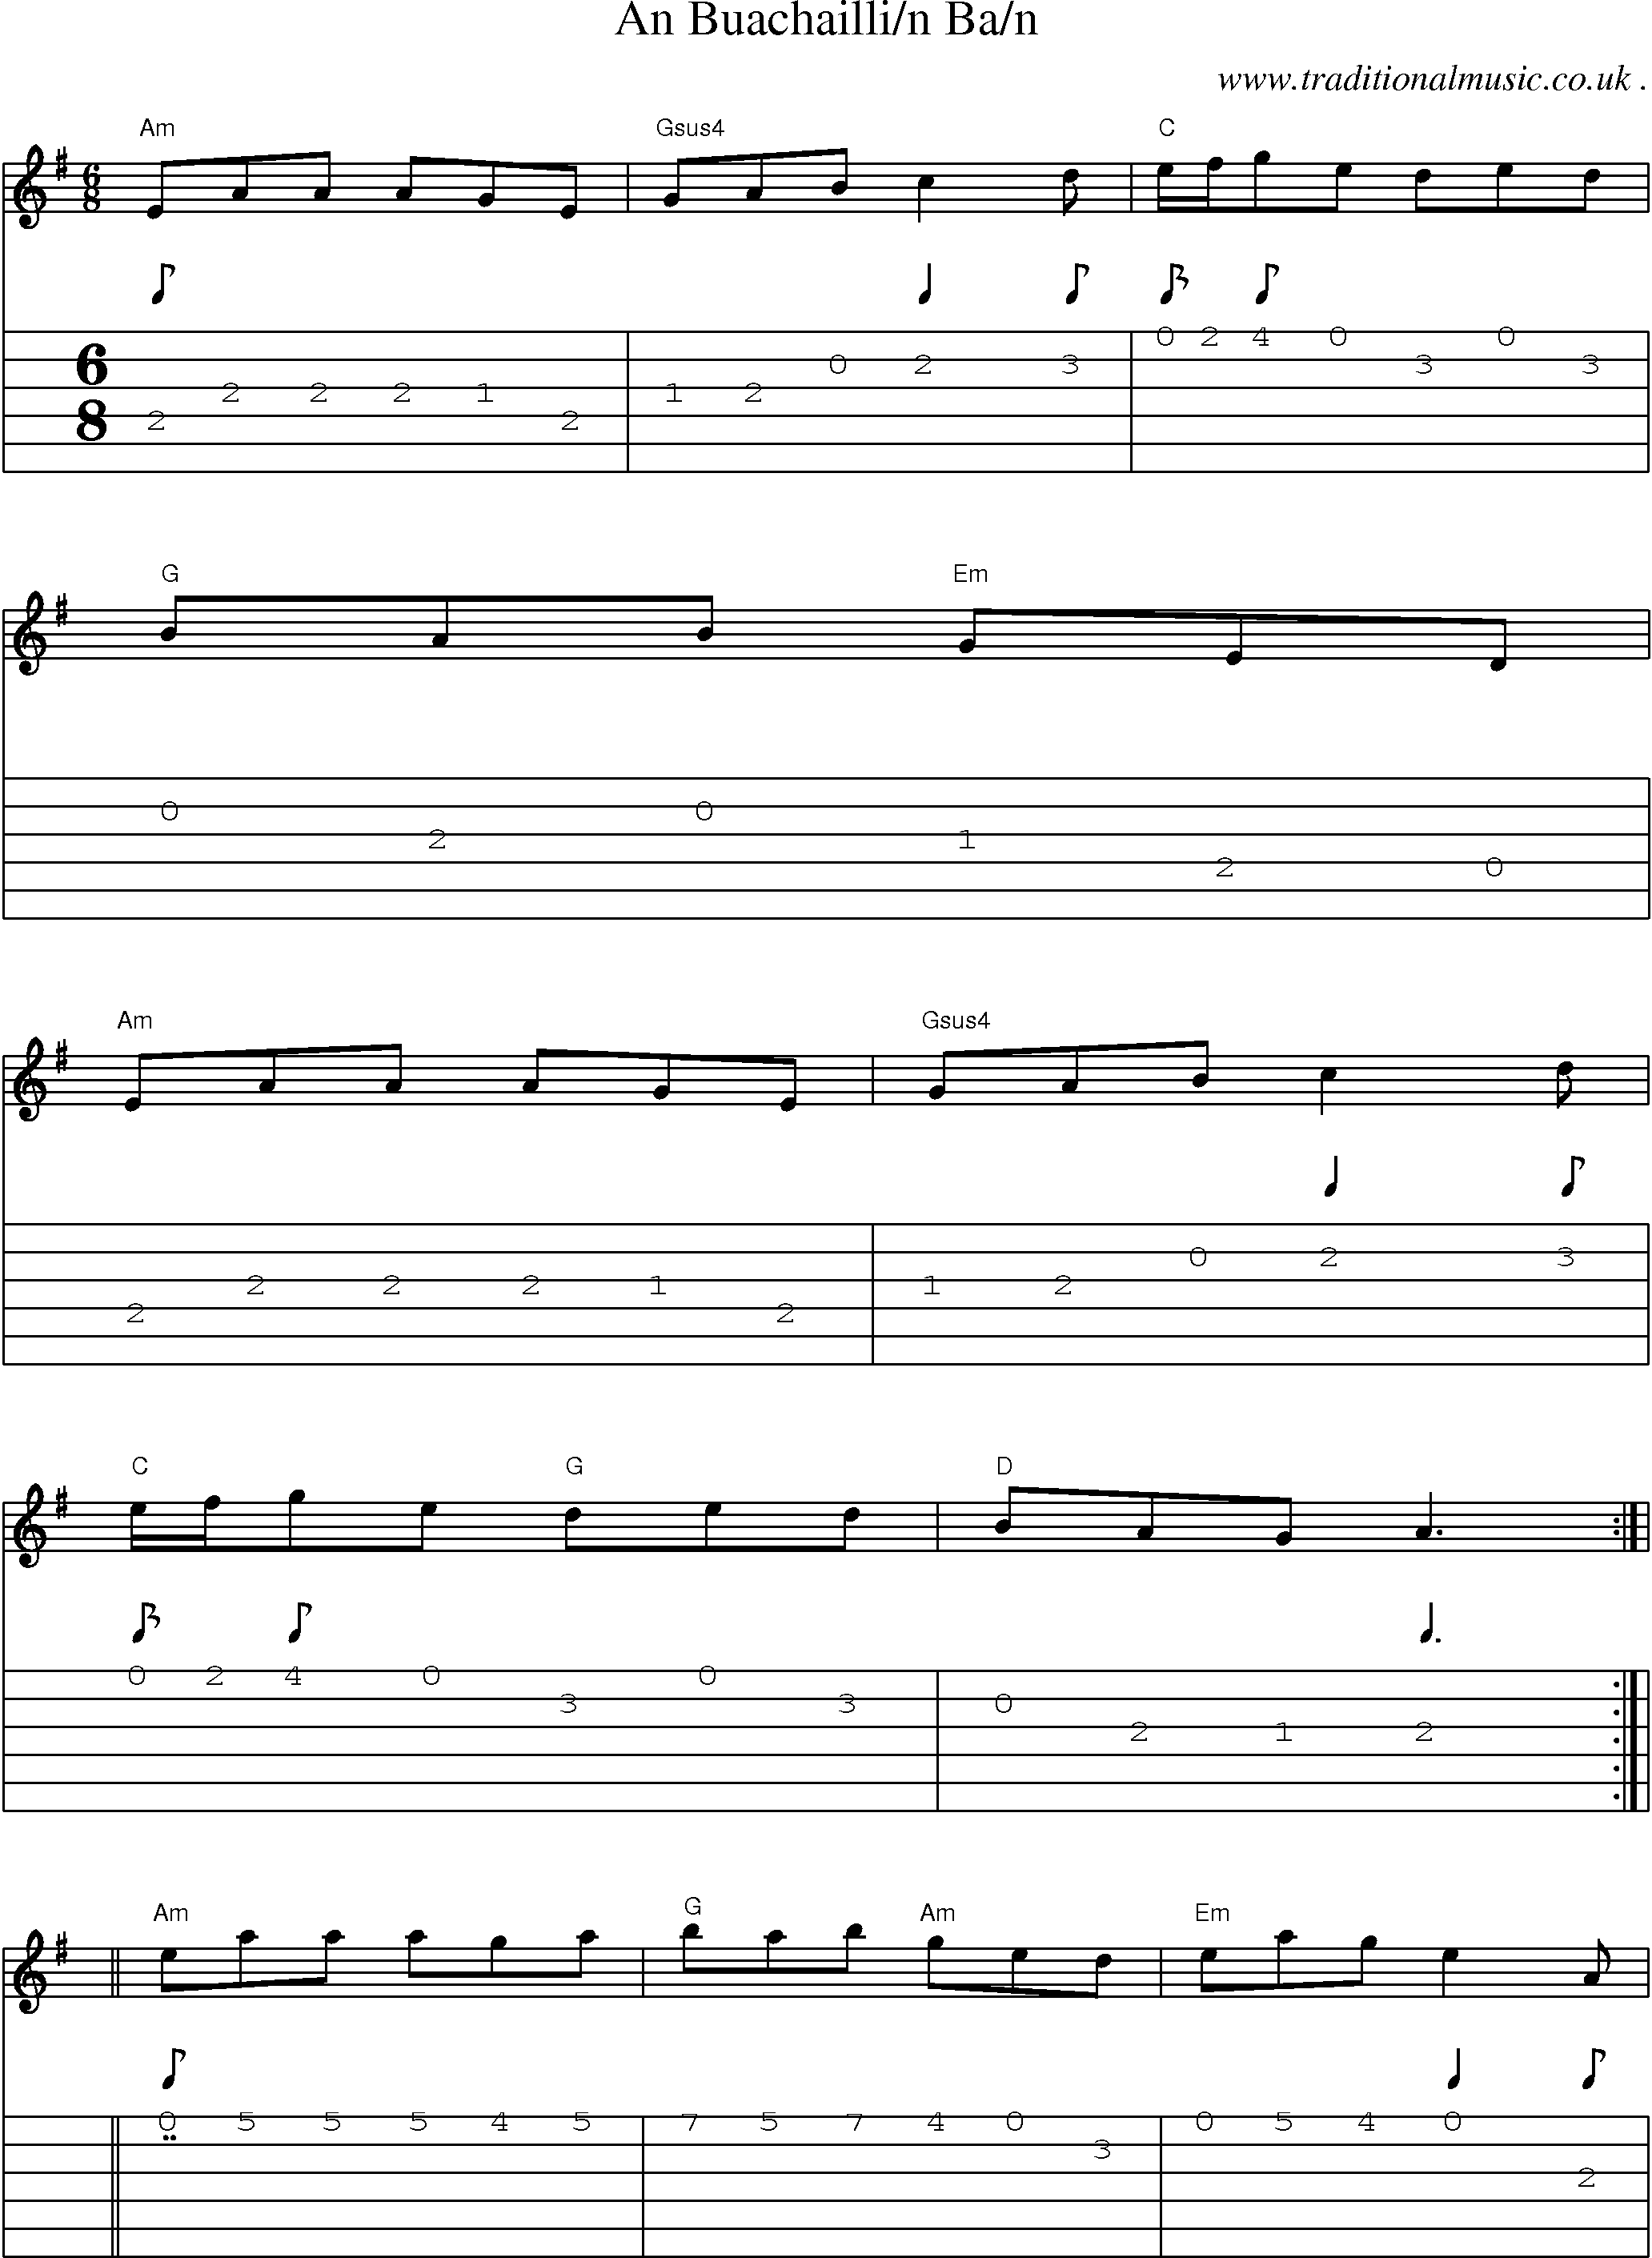 Music Score and Guitar Tabs for An Buachaillin Ban